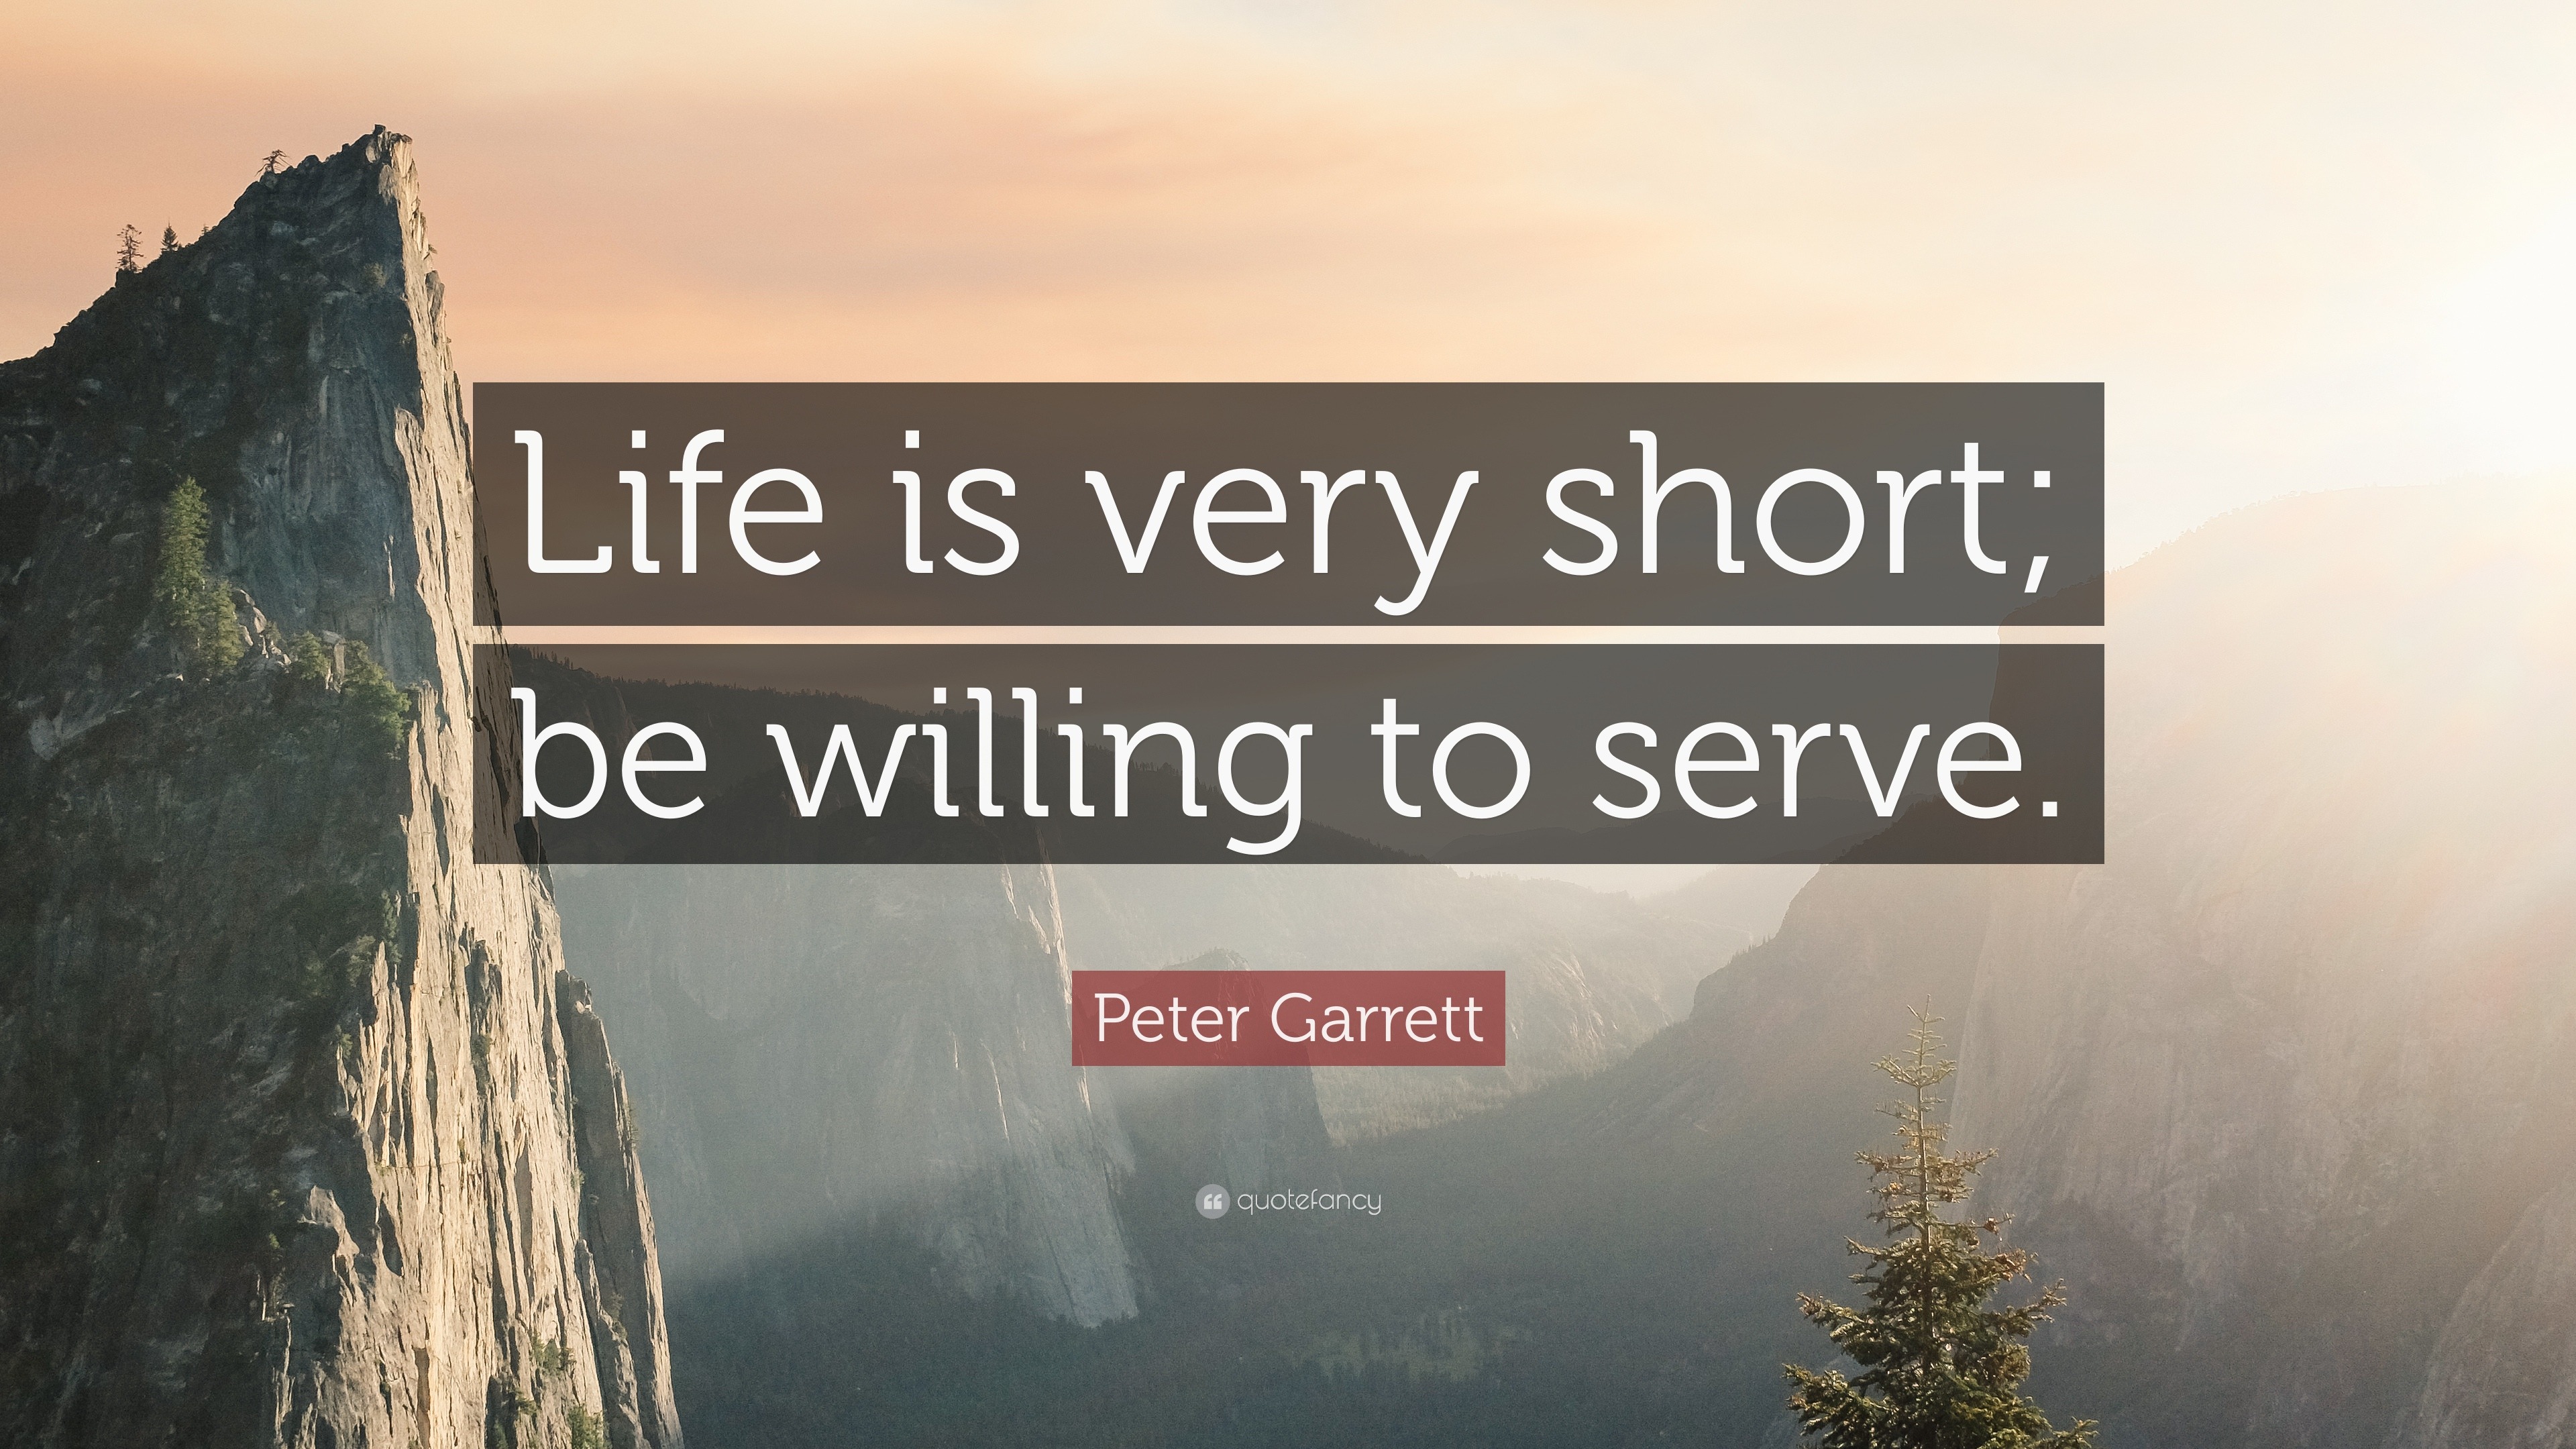 Peter Garrett Quote “Life is very short be willing to serve ”